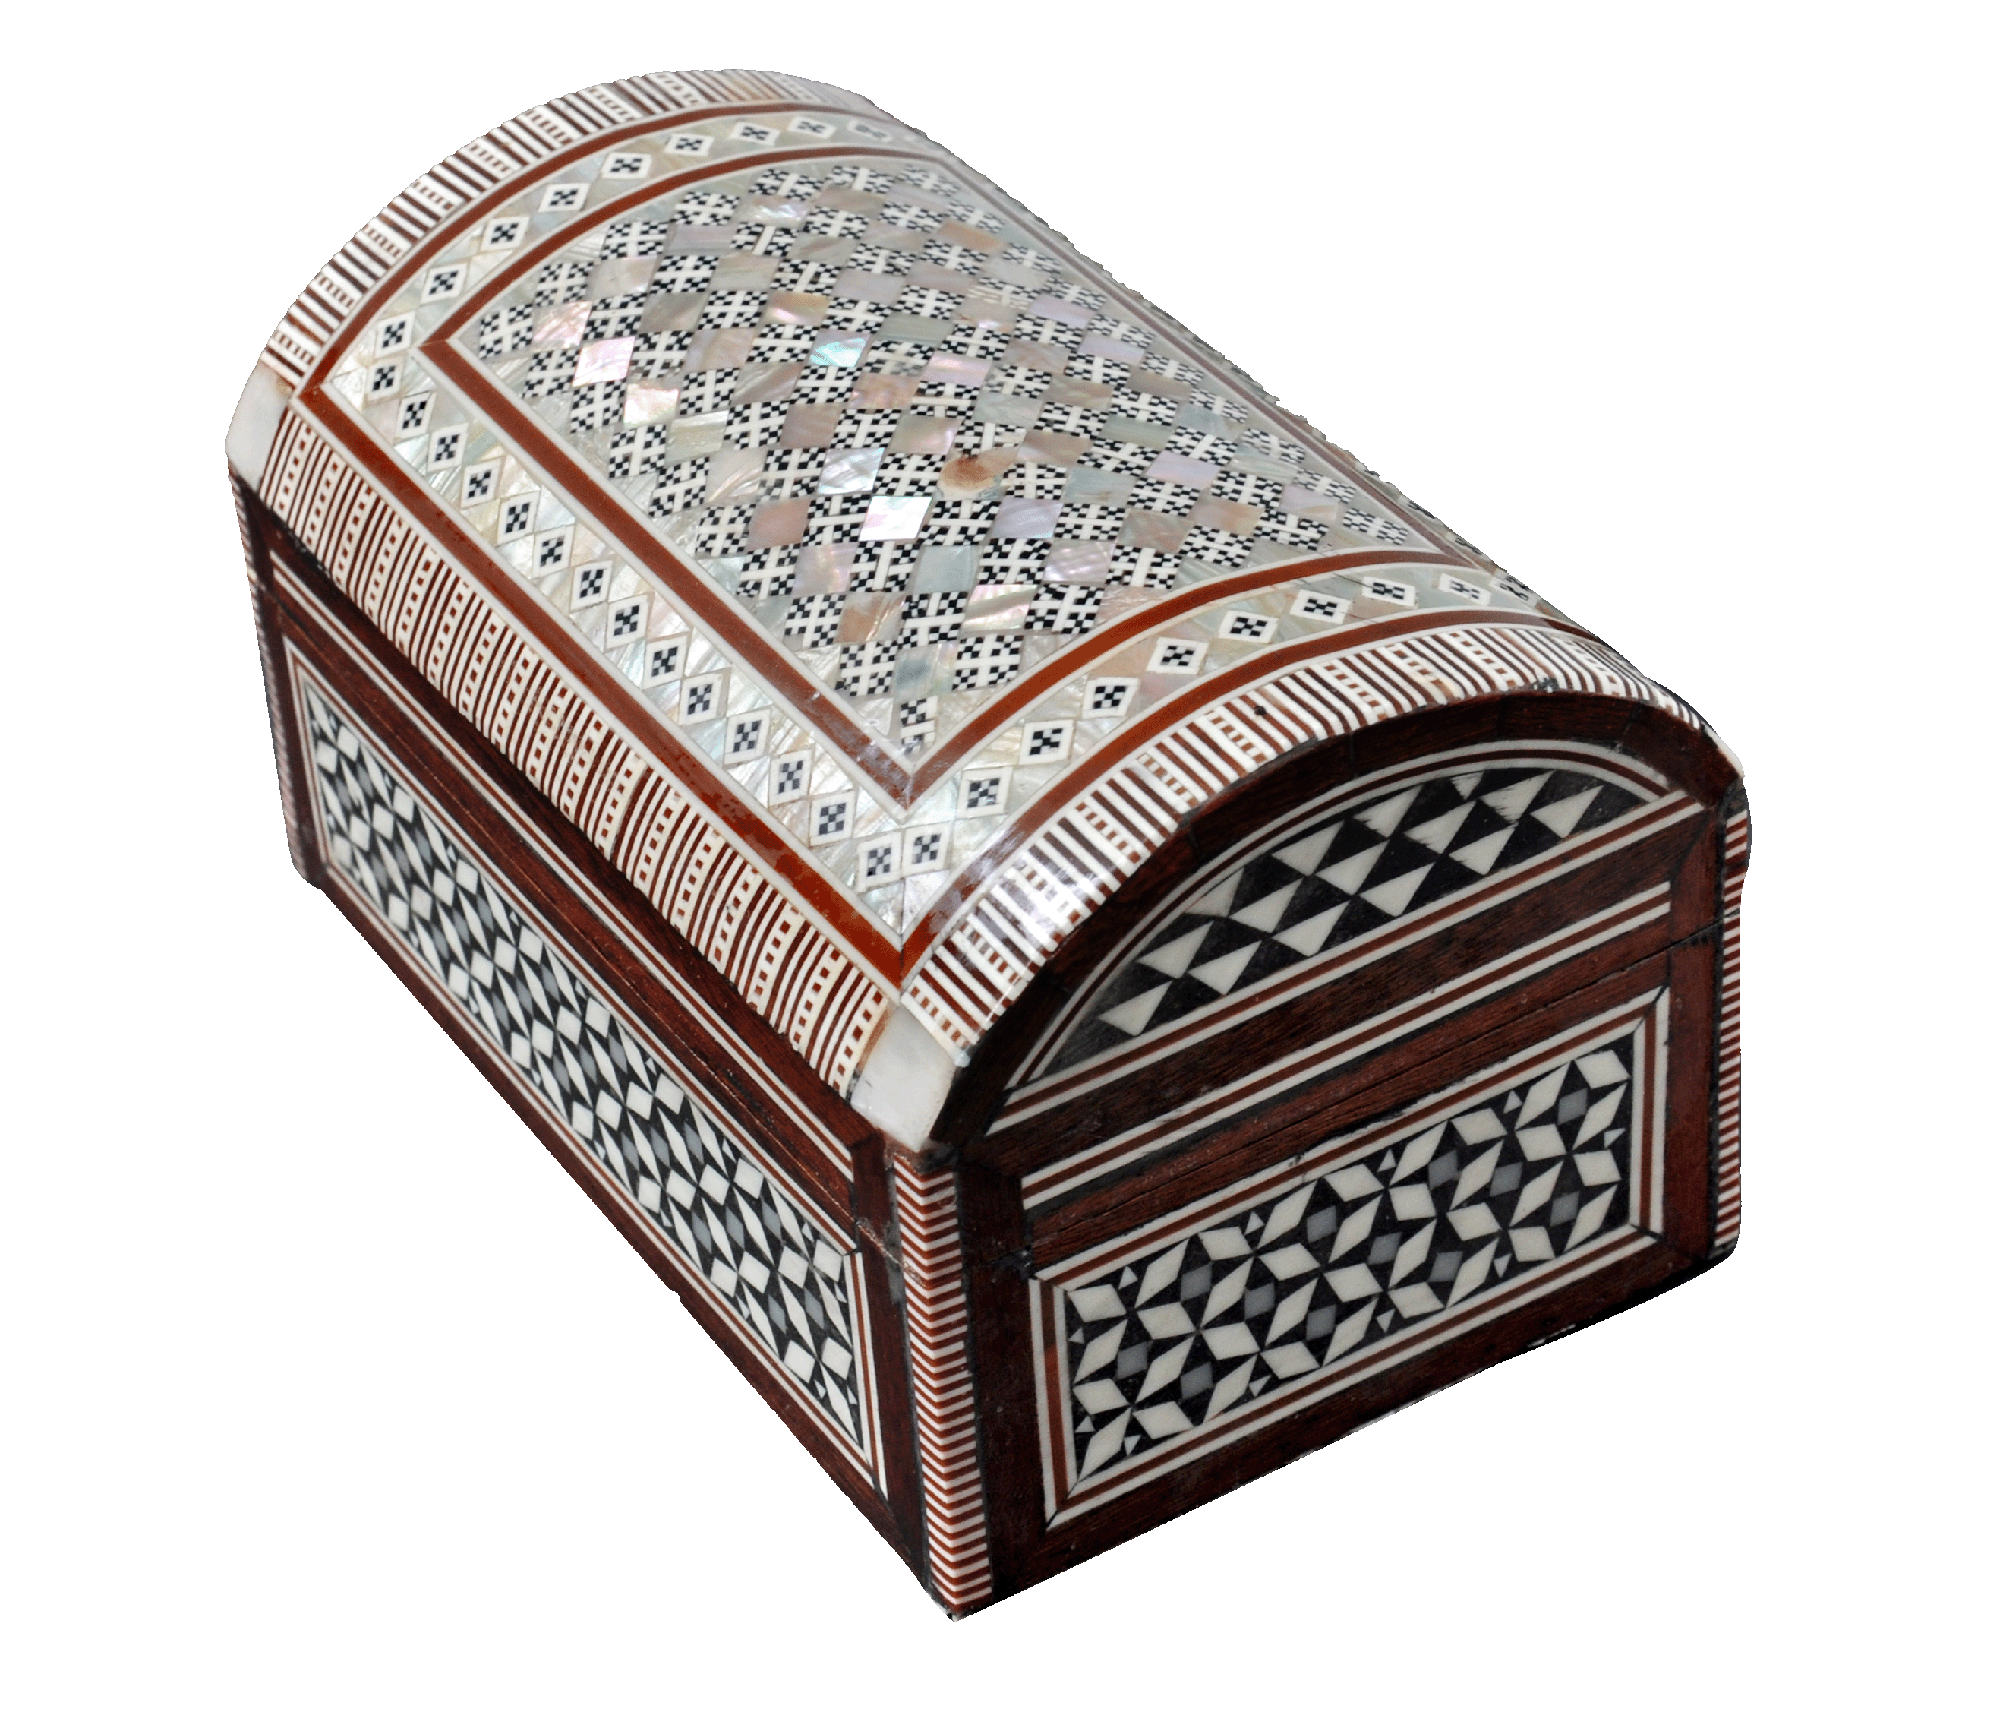 Egyptian Mosaic Jewelry Trinket Box Mother of Pearl Bx11